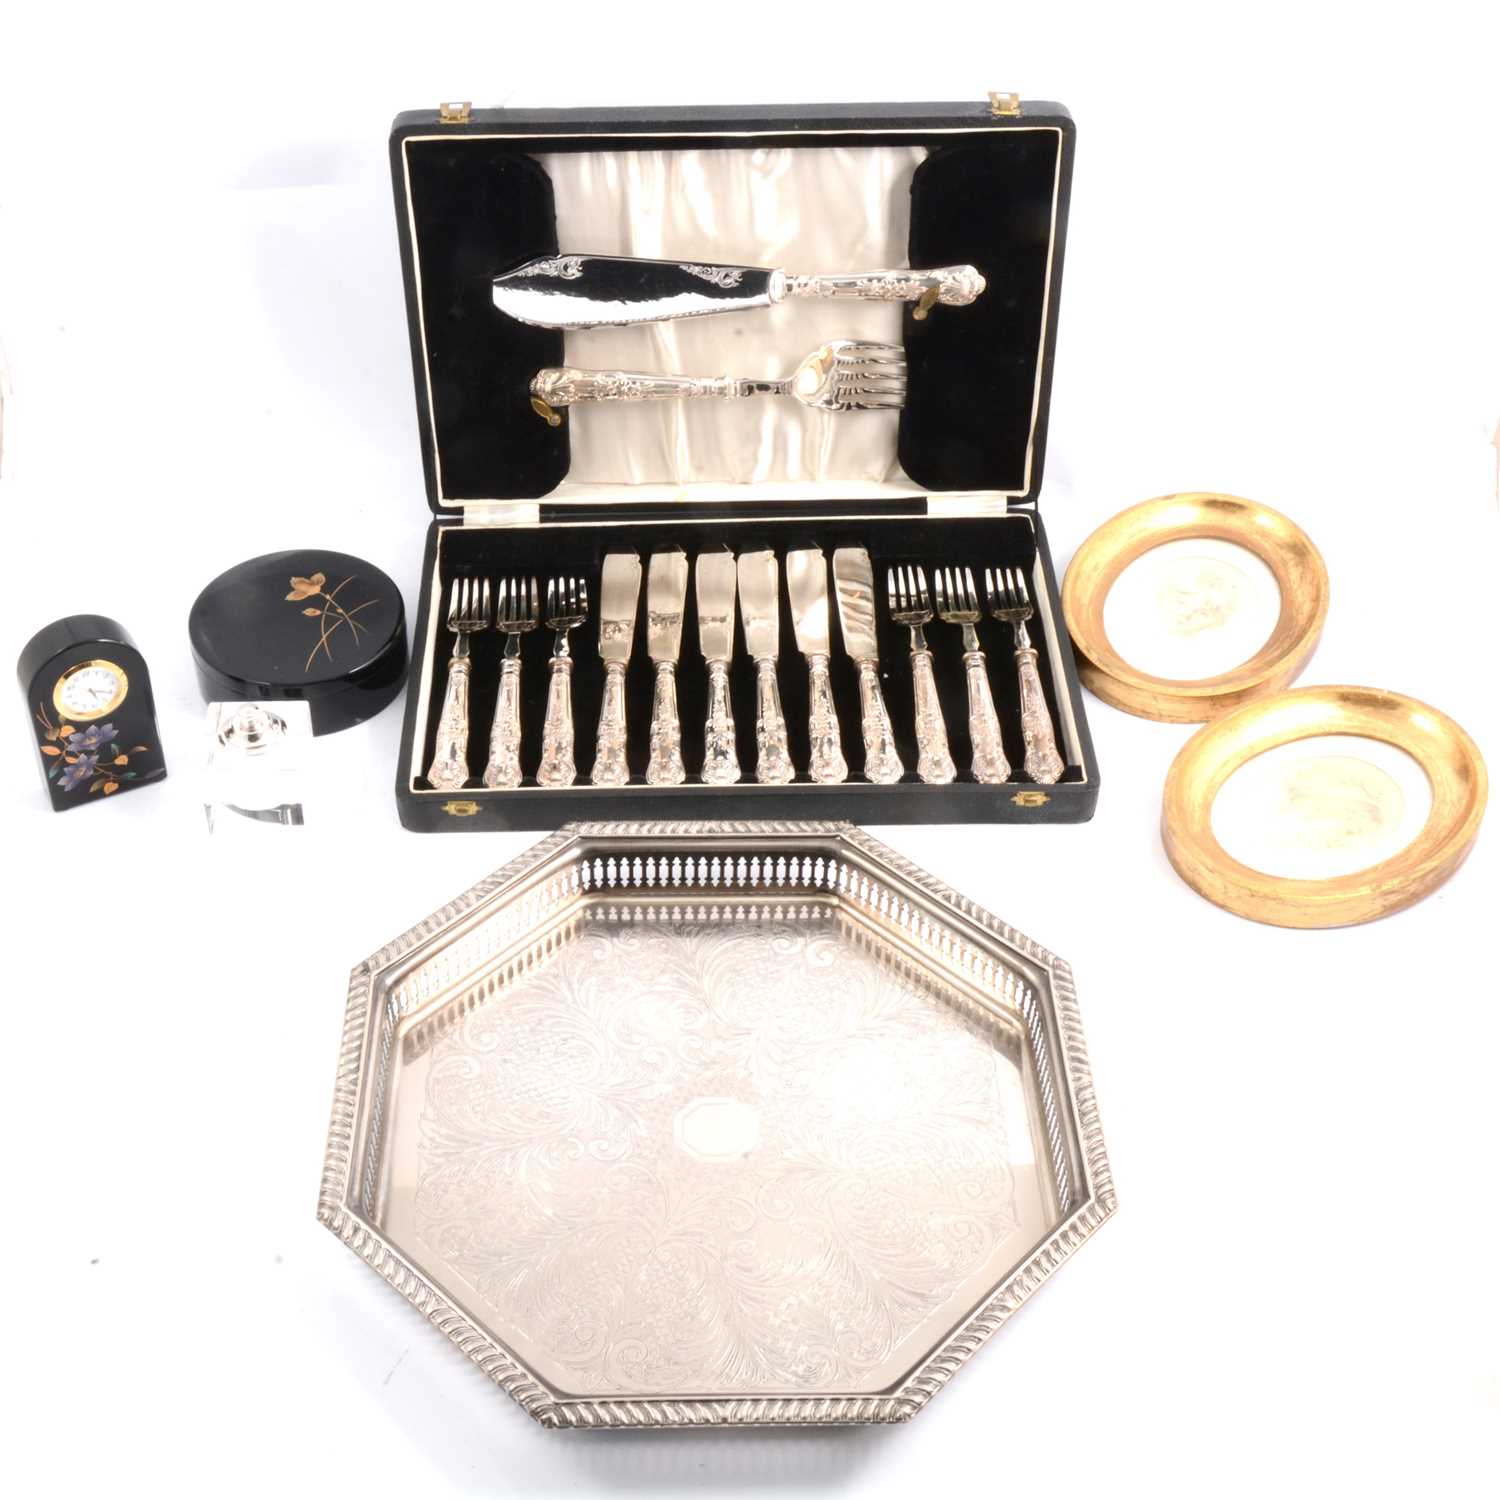 Lot 126 - Set silver-handled fish servers and eaters, plated tray, napkin rings, and other items.